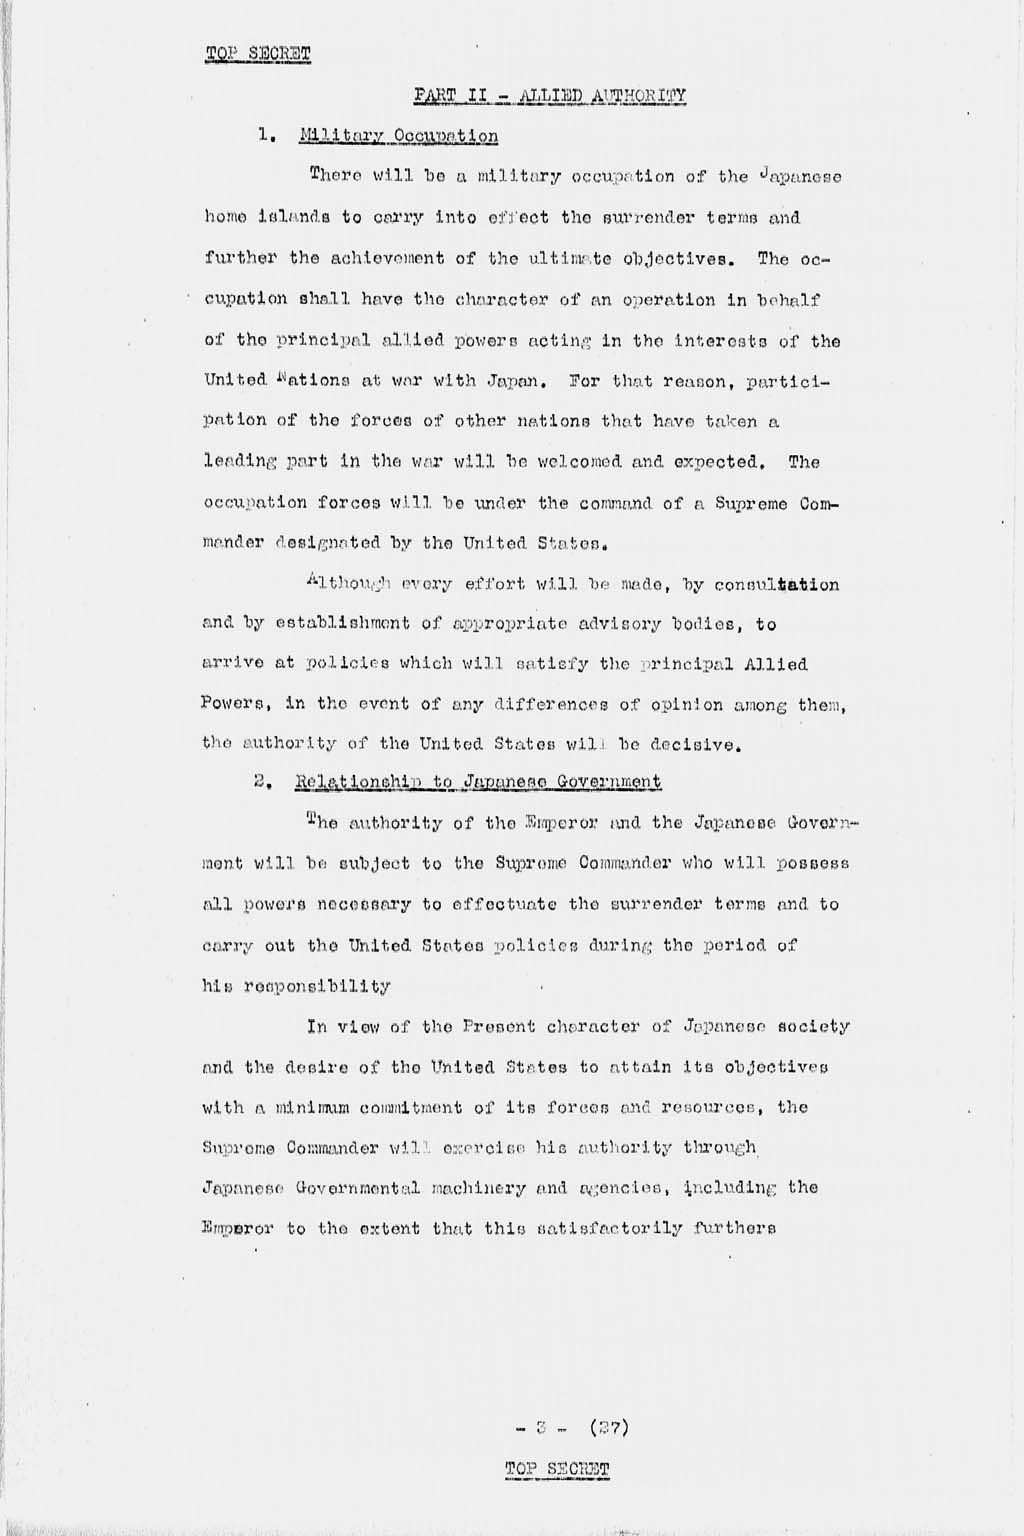 [U.S. Initial Post-Surrender Policy for Japan (SWNCC150/3)](Larger image)